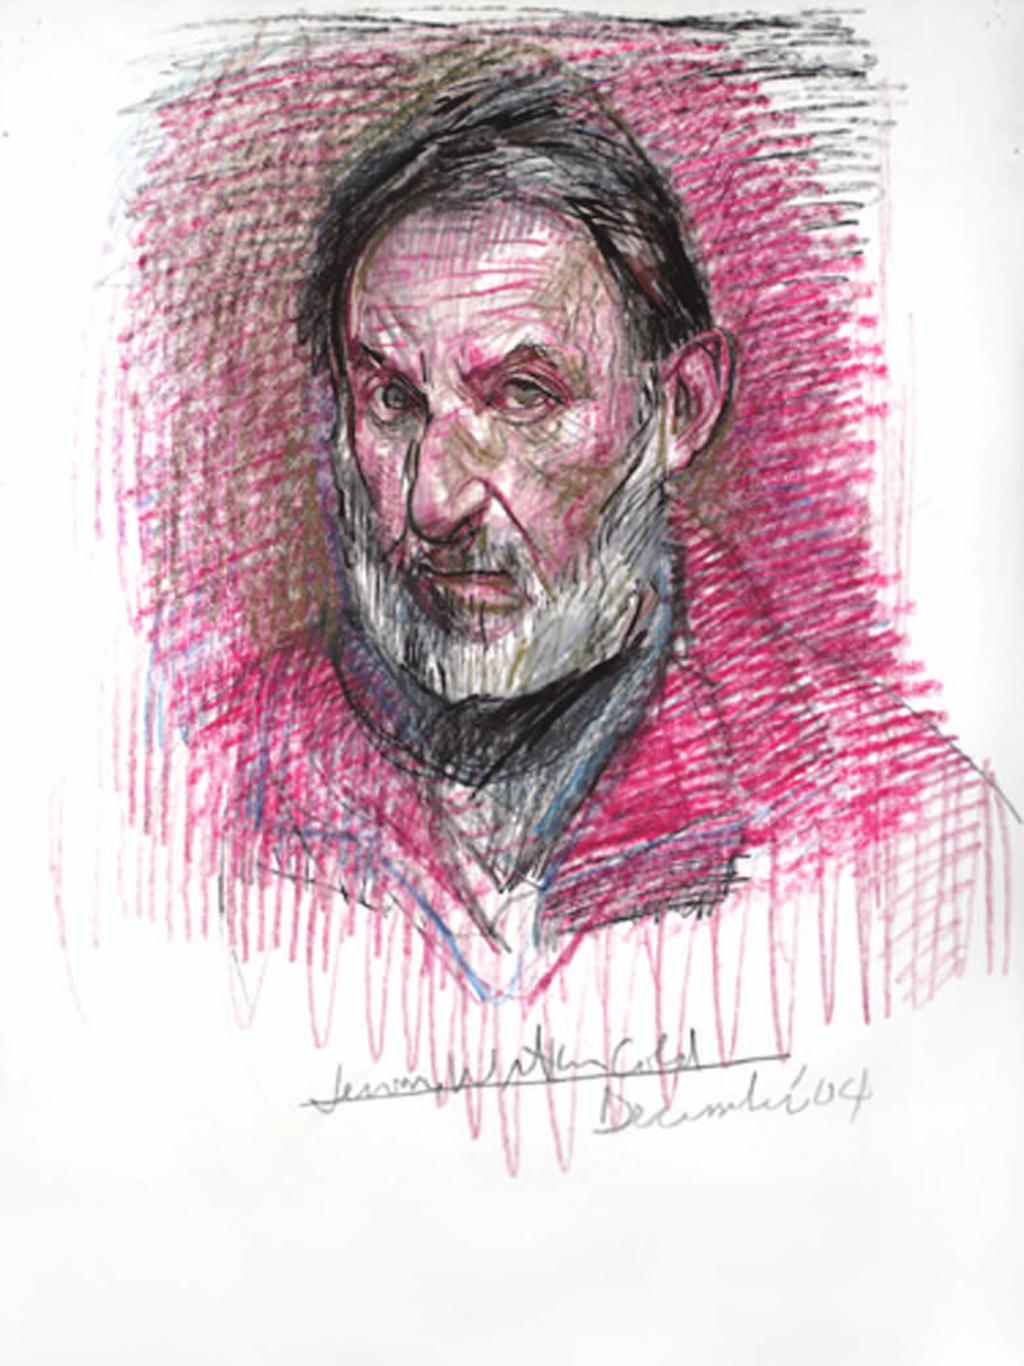 ABOVE: Self-Portrait (Red and Black), 2004 ON THE COVER.